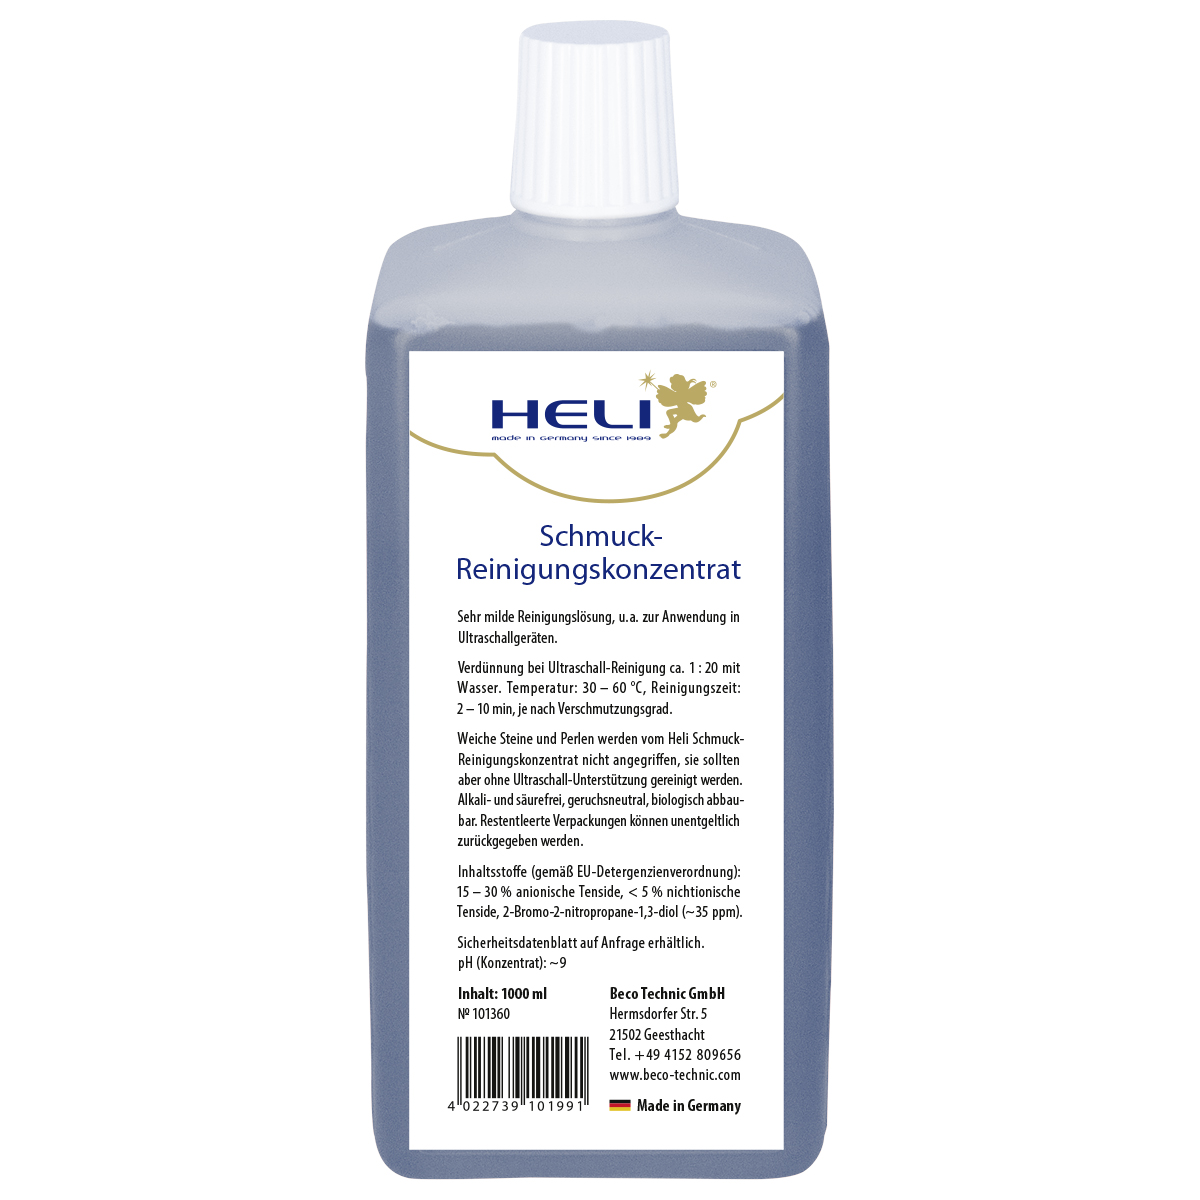 Heli cleaning concentrate for jewelry in ultrasonic unit, 1:20, 1 l